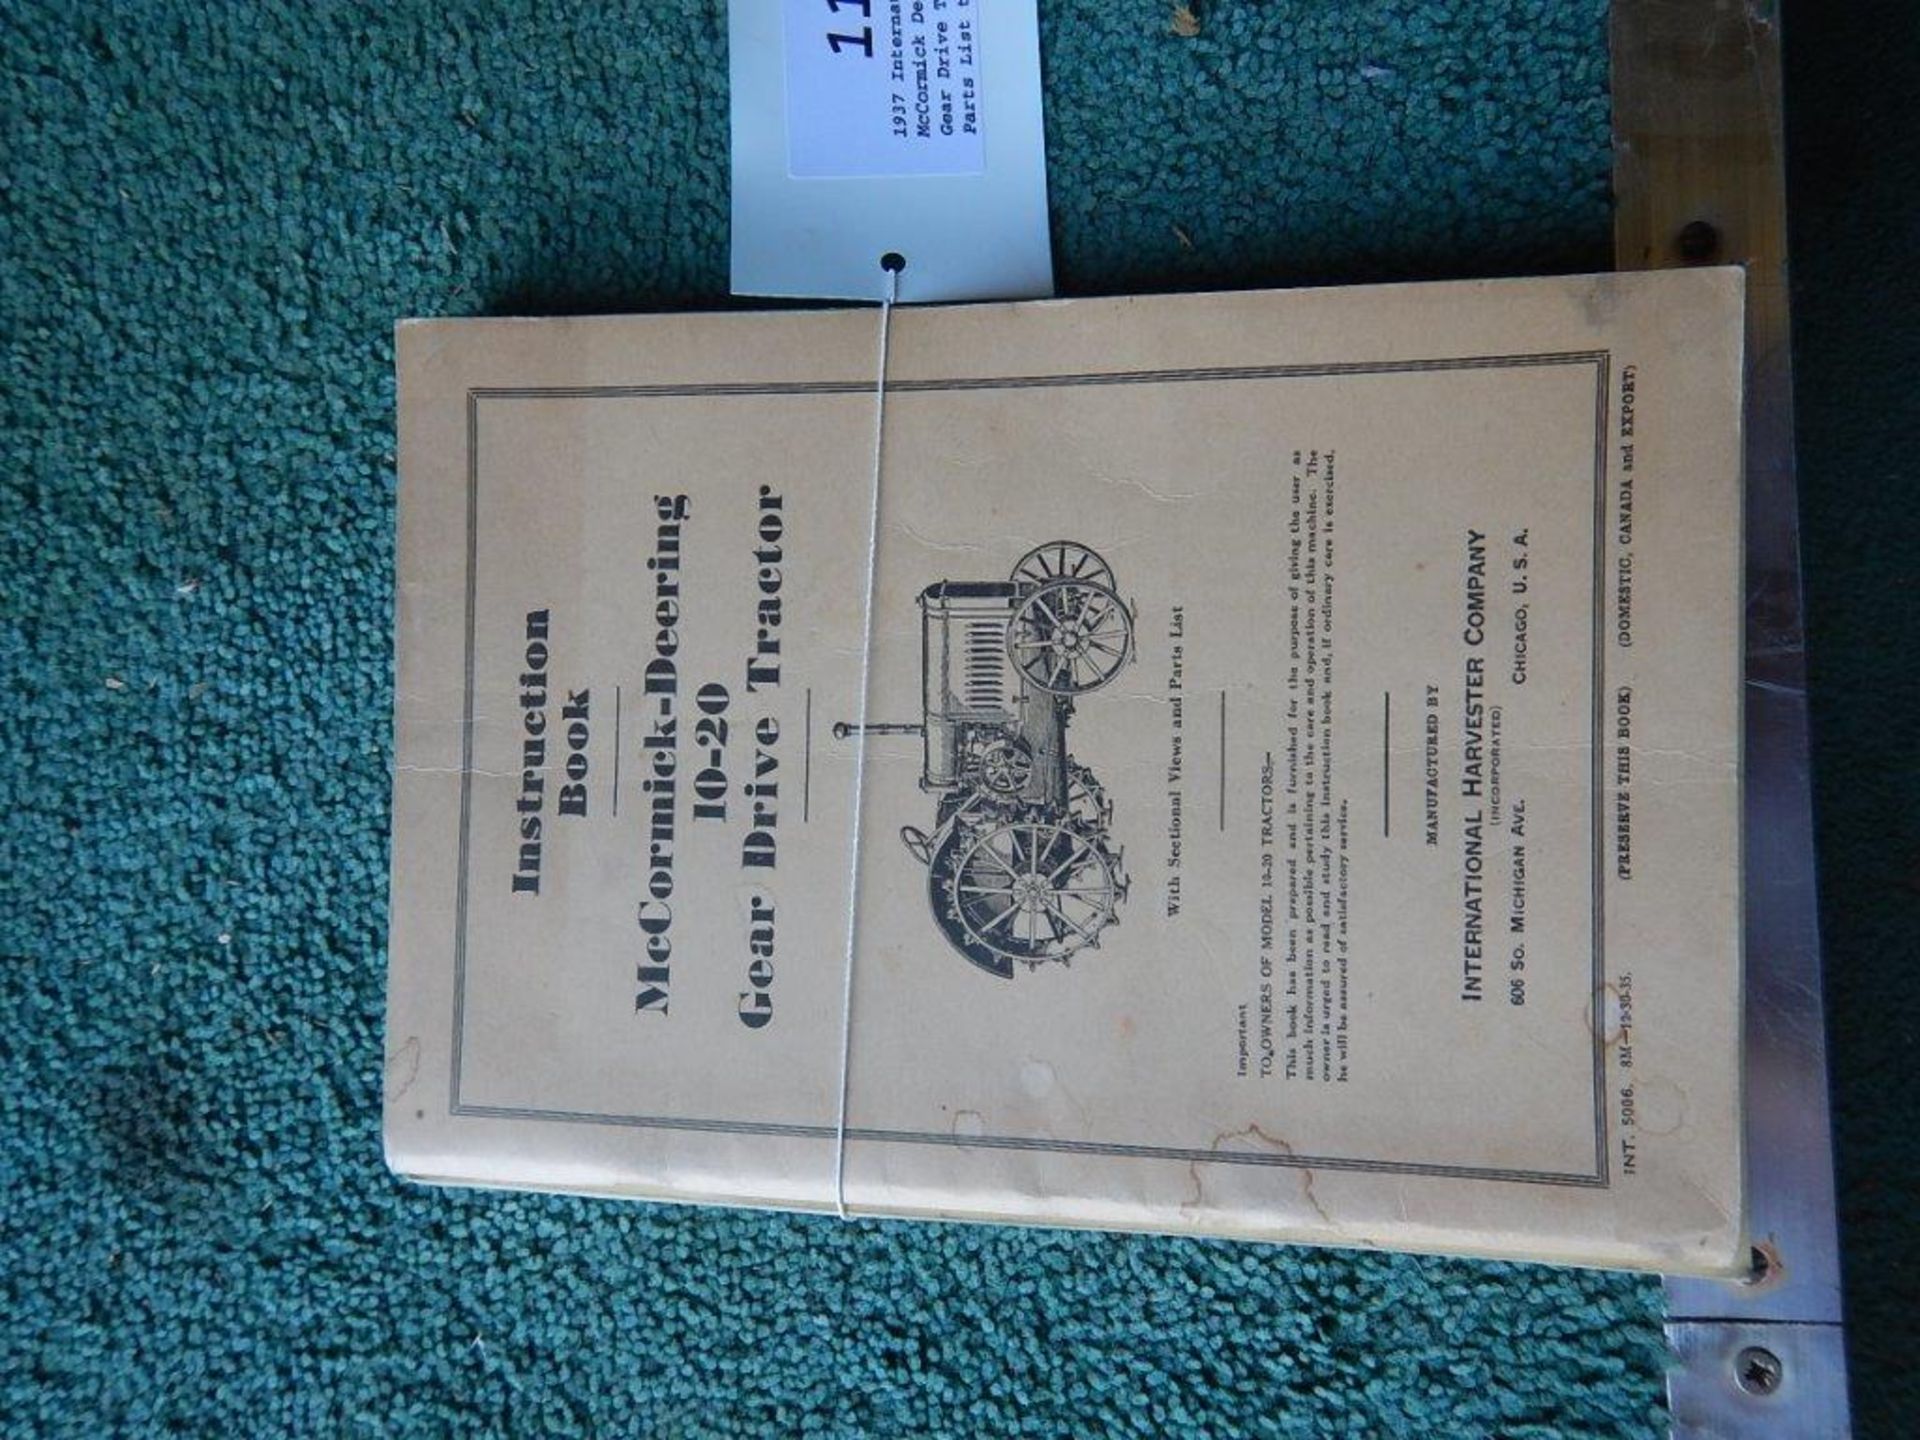 1937 International McCormick Deering 10-20 Gear Drive Tractor Parts List t/w another